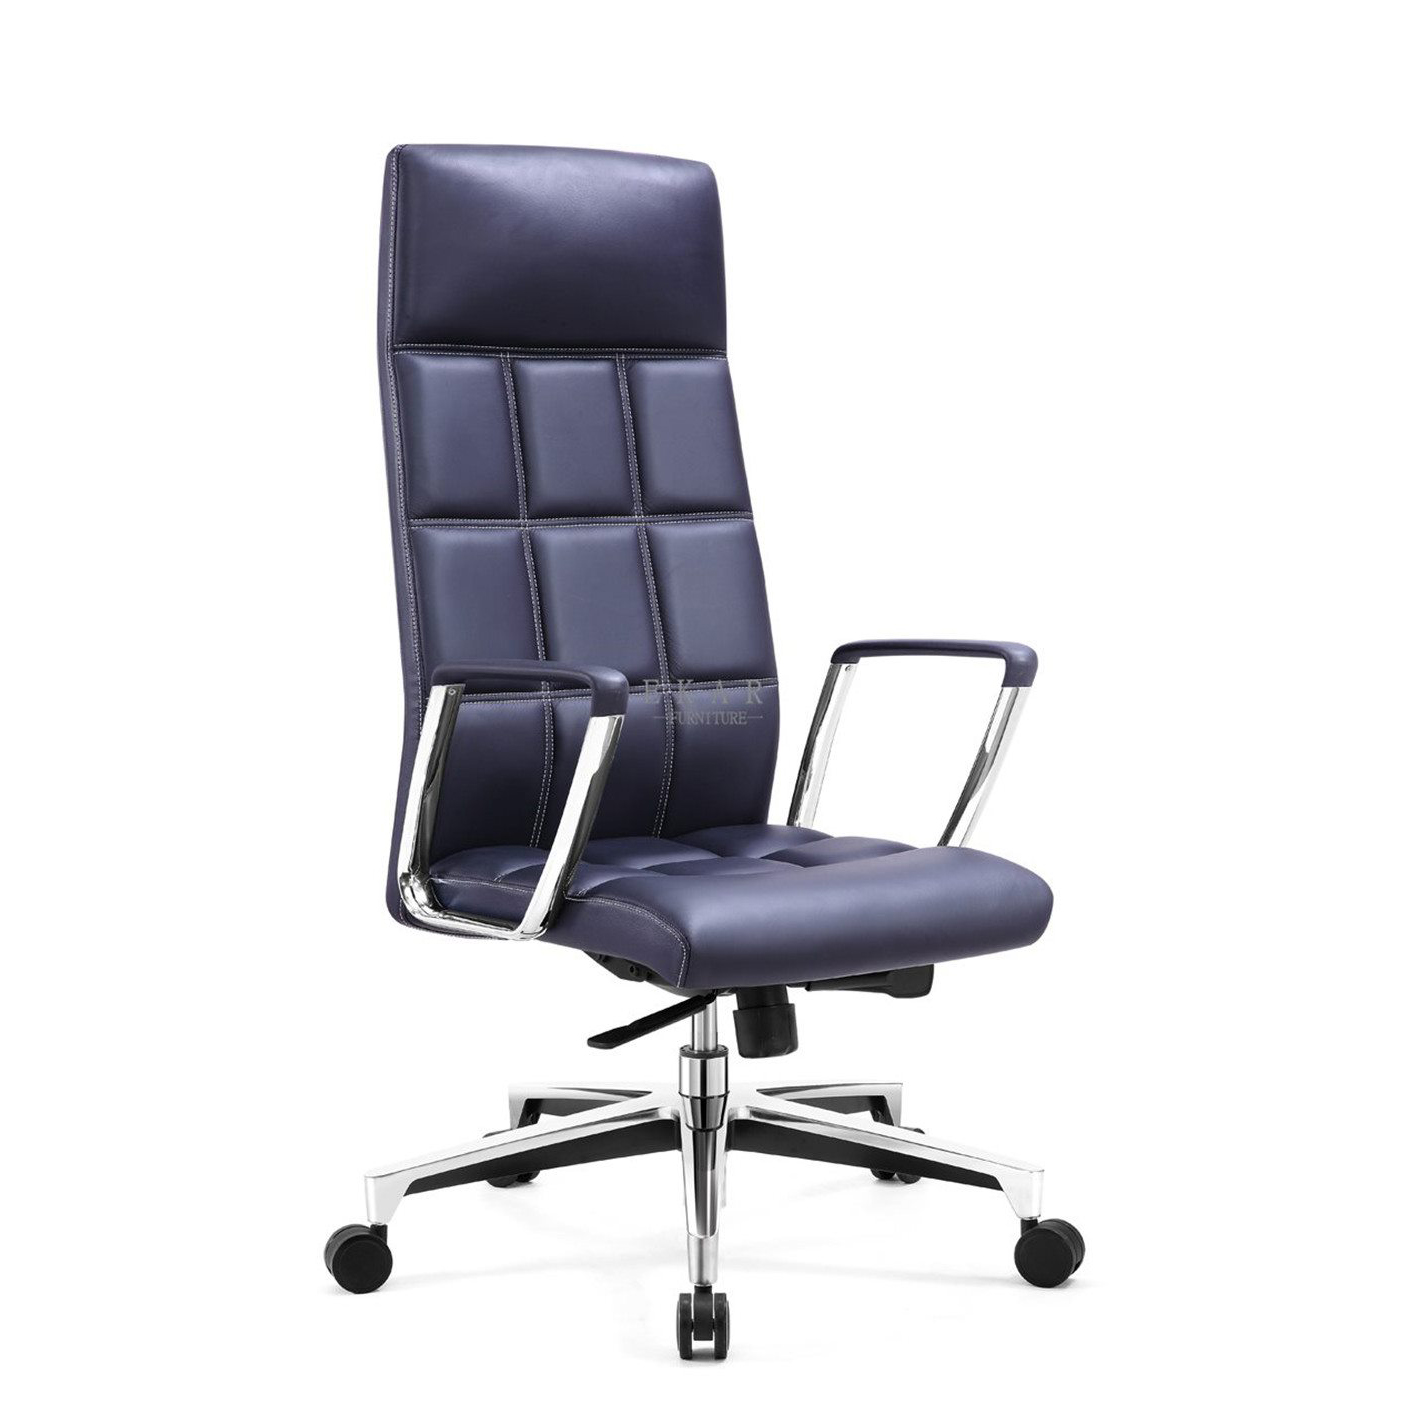 Rolling executive desk chair